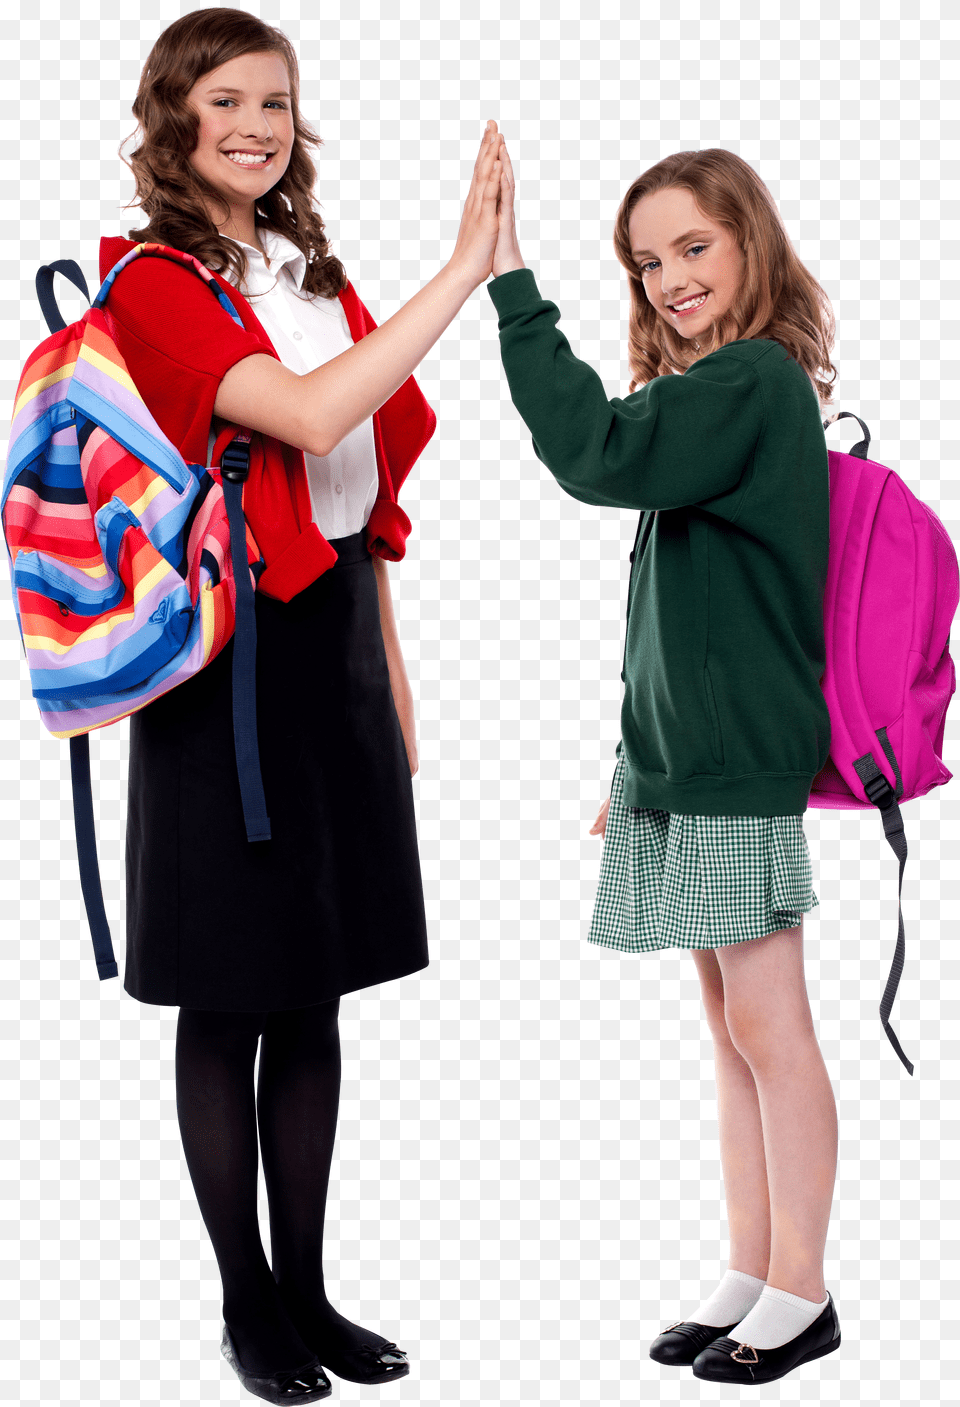 Student Full Hd Png Image